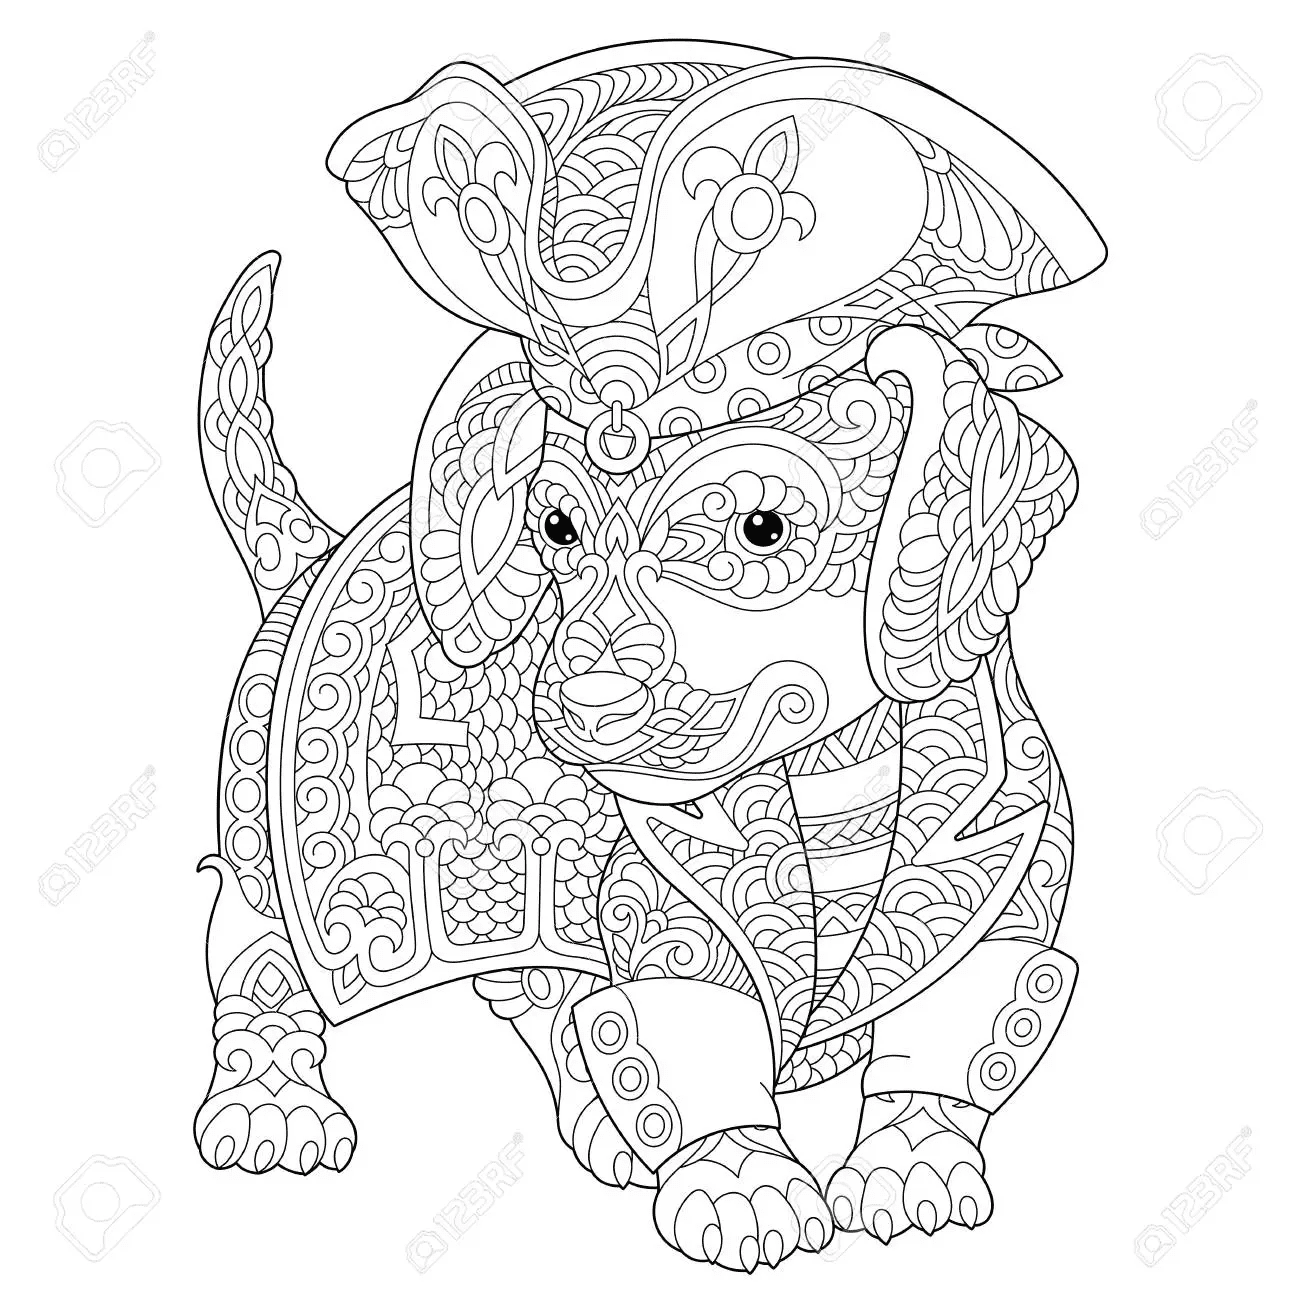 Puppy Dog Hard Coloring Page